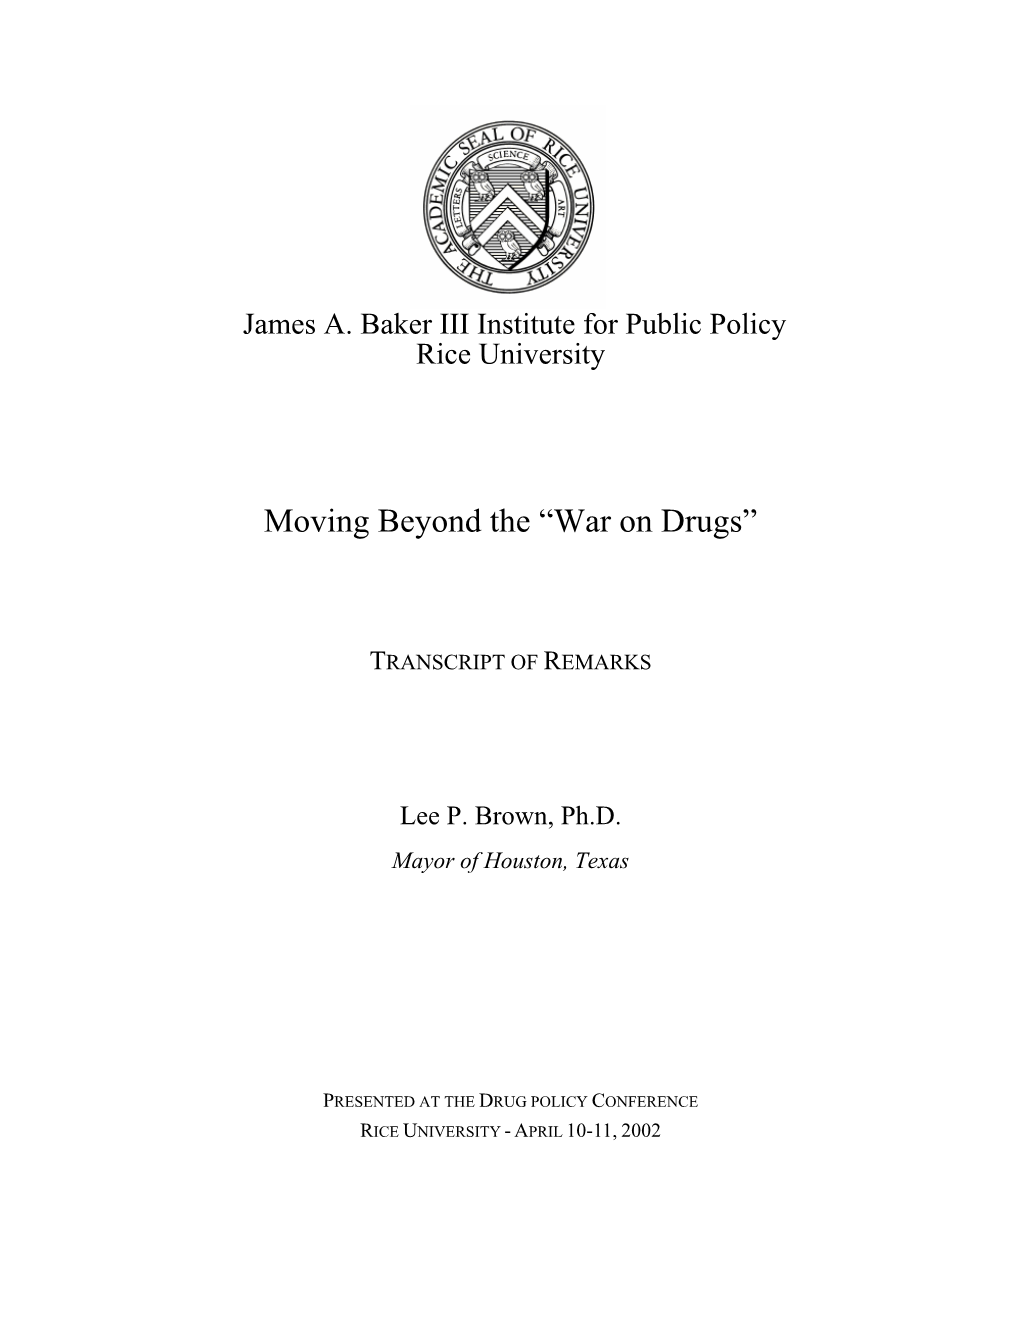 Moving Beyond the “War on Drugs”